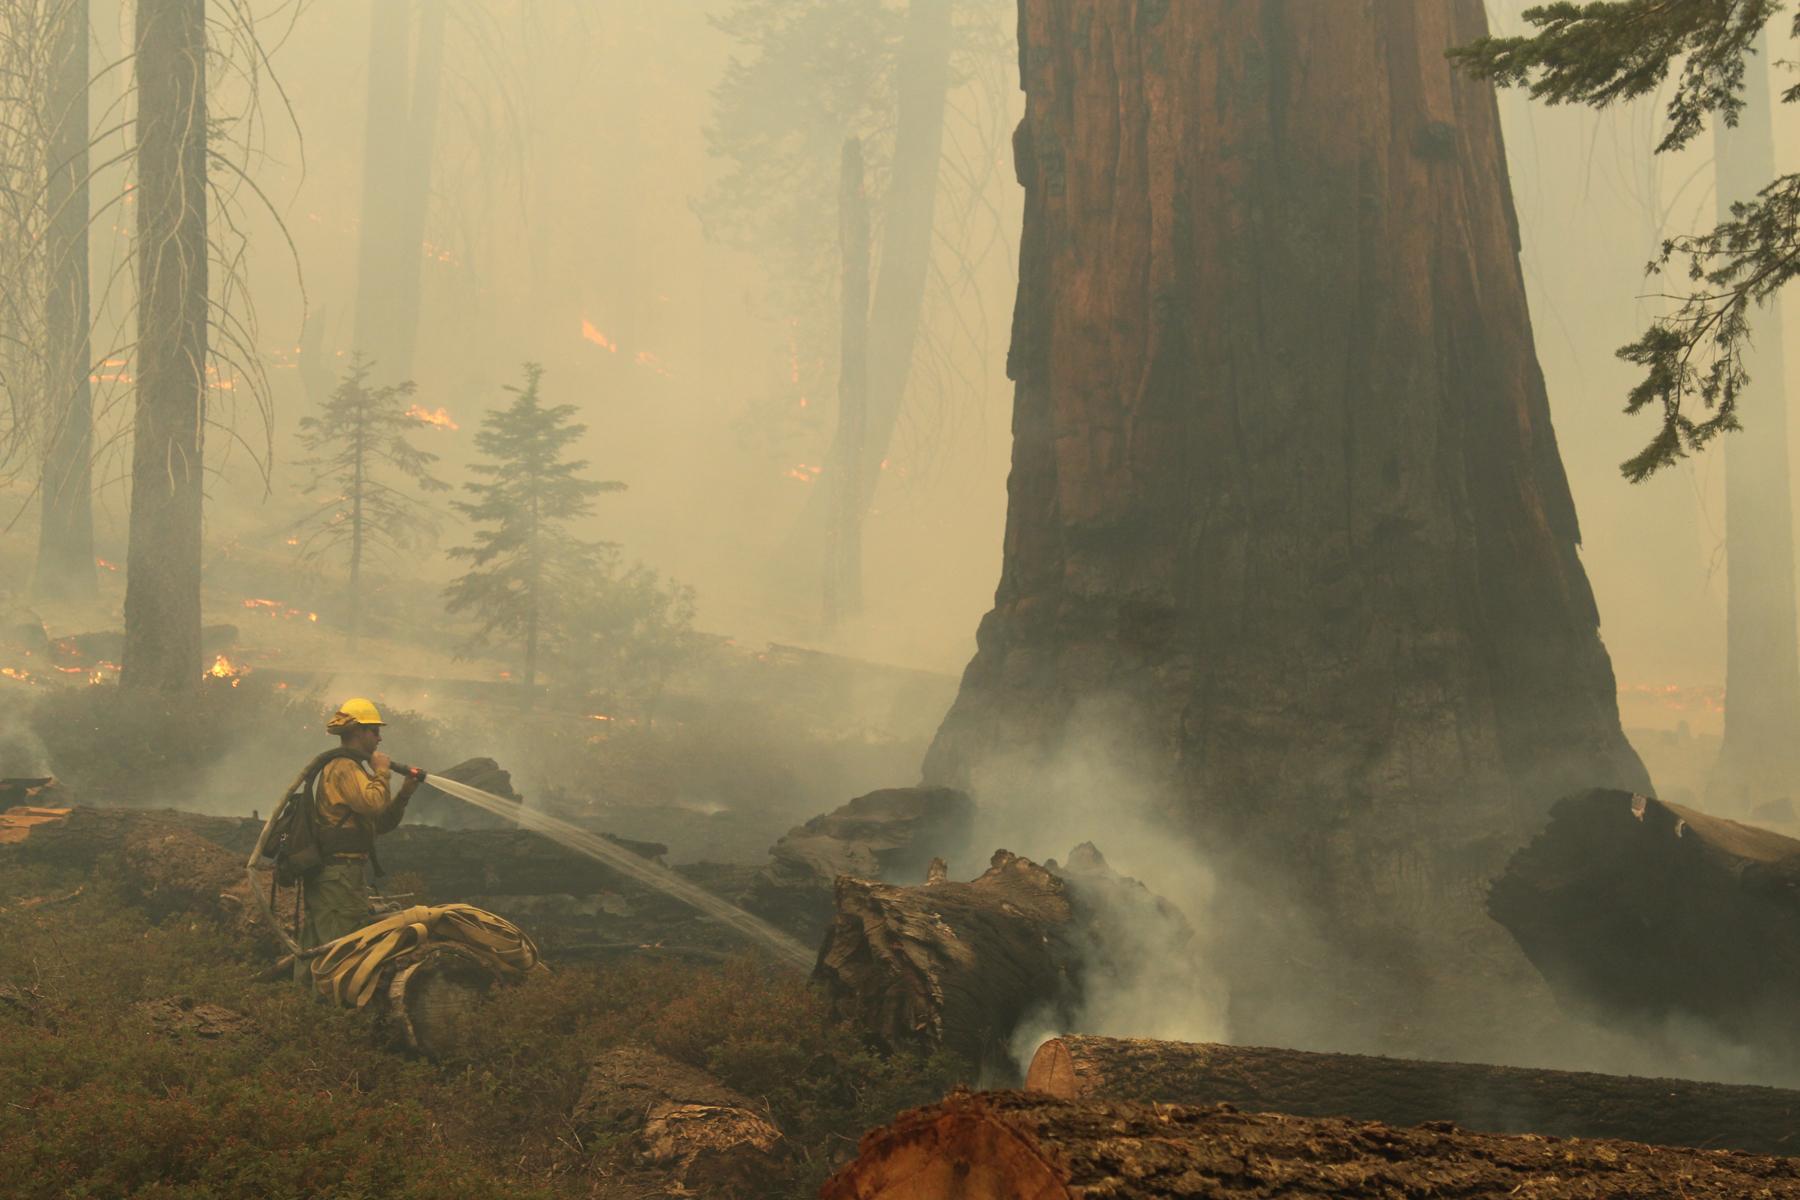 Firefighter Sprays Base of Giant Sequoia. Photo: Mike McMillan - BIA